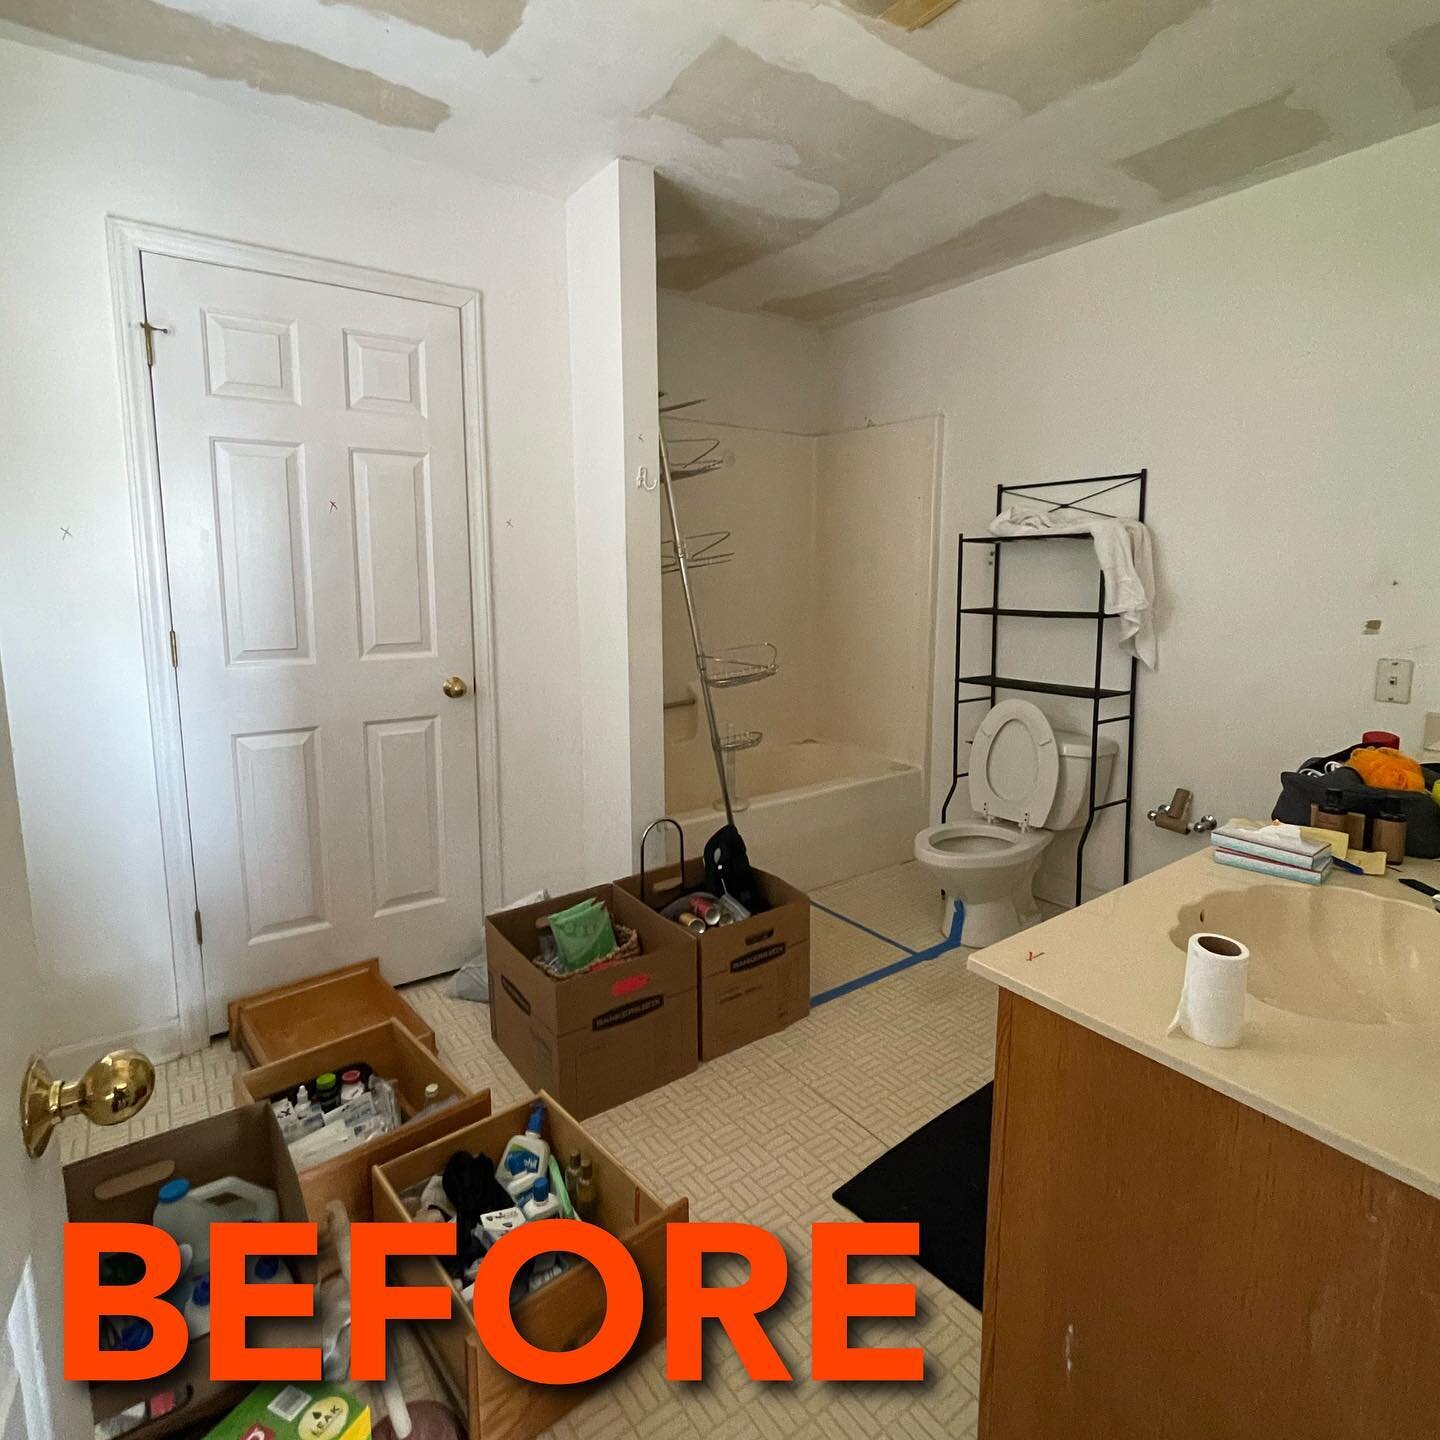 Bathroom demo! Swipe ➡️

Check out this transformation!

#beforeandafter #demo #outwiththeold #renovation #transformation #bathroom